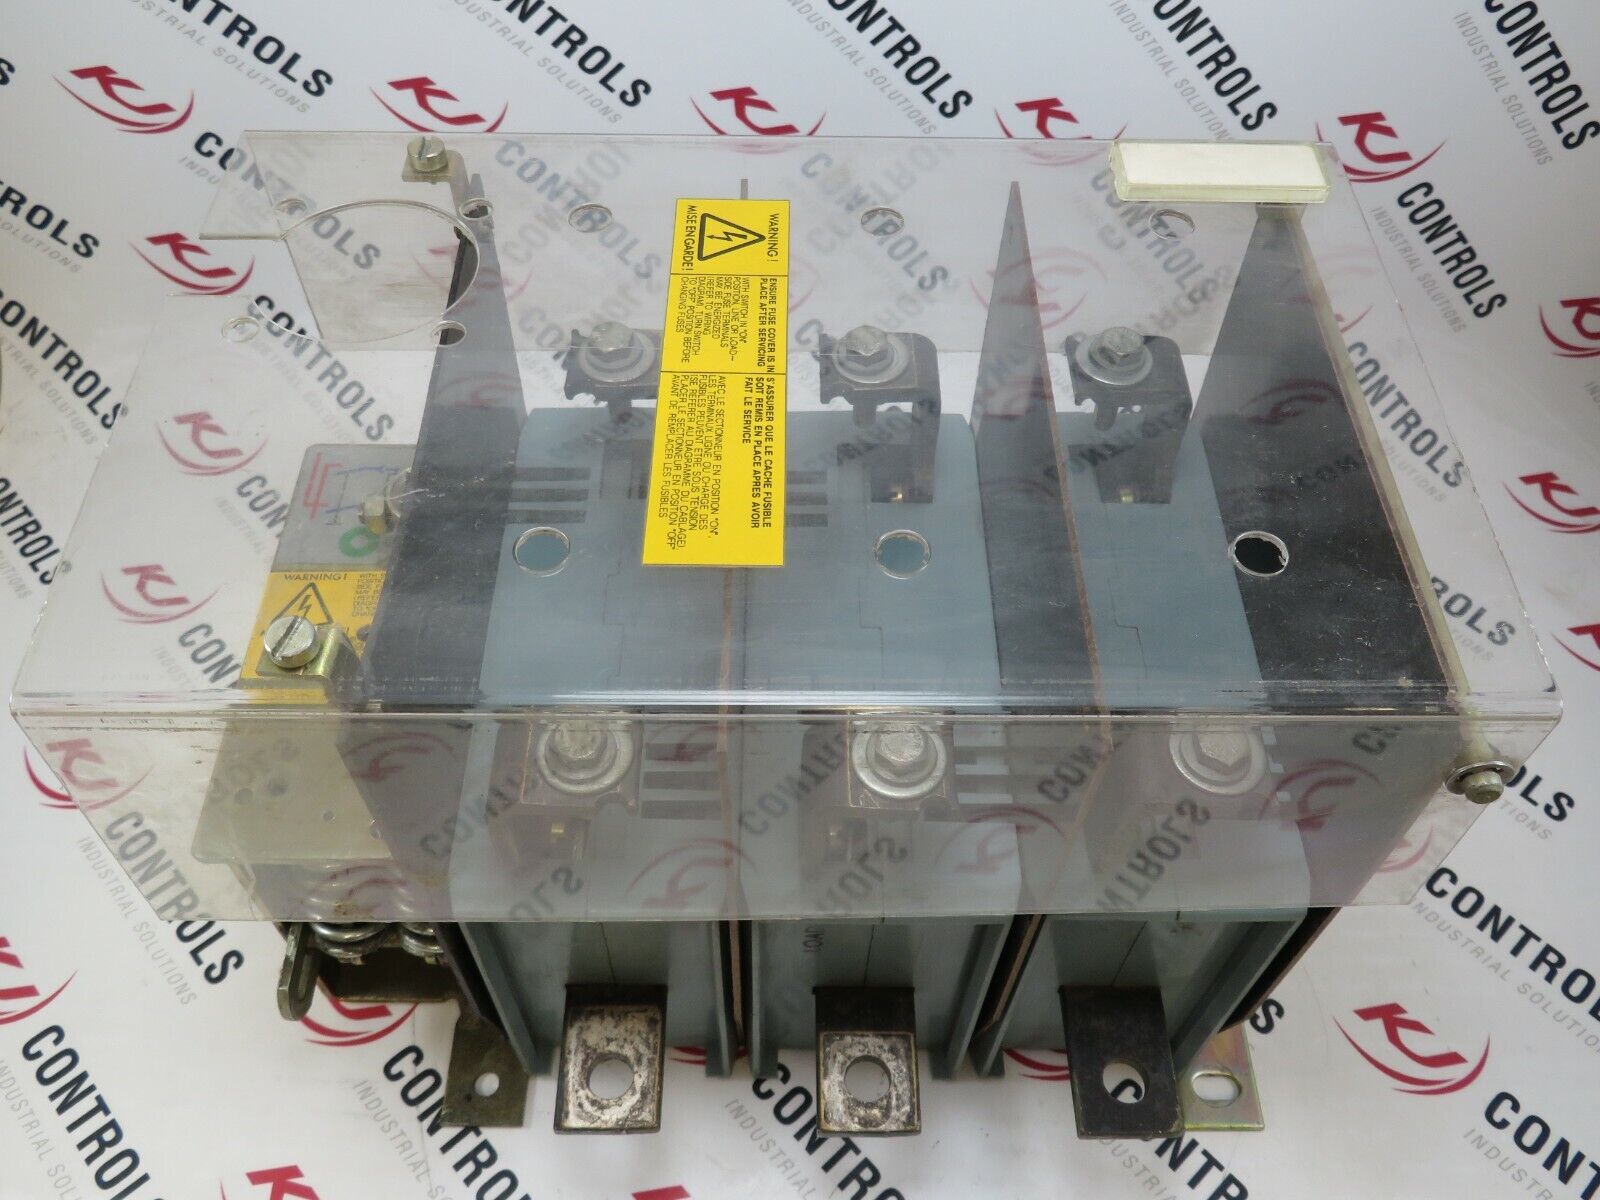 Asea Brown Boveri ABB OESA-F200JT6 Fused Disconnect Switch 600VAC 200A 150HP